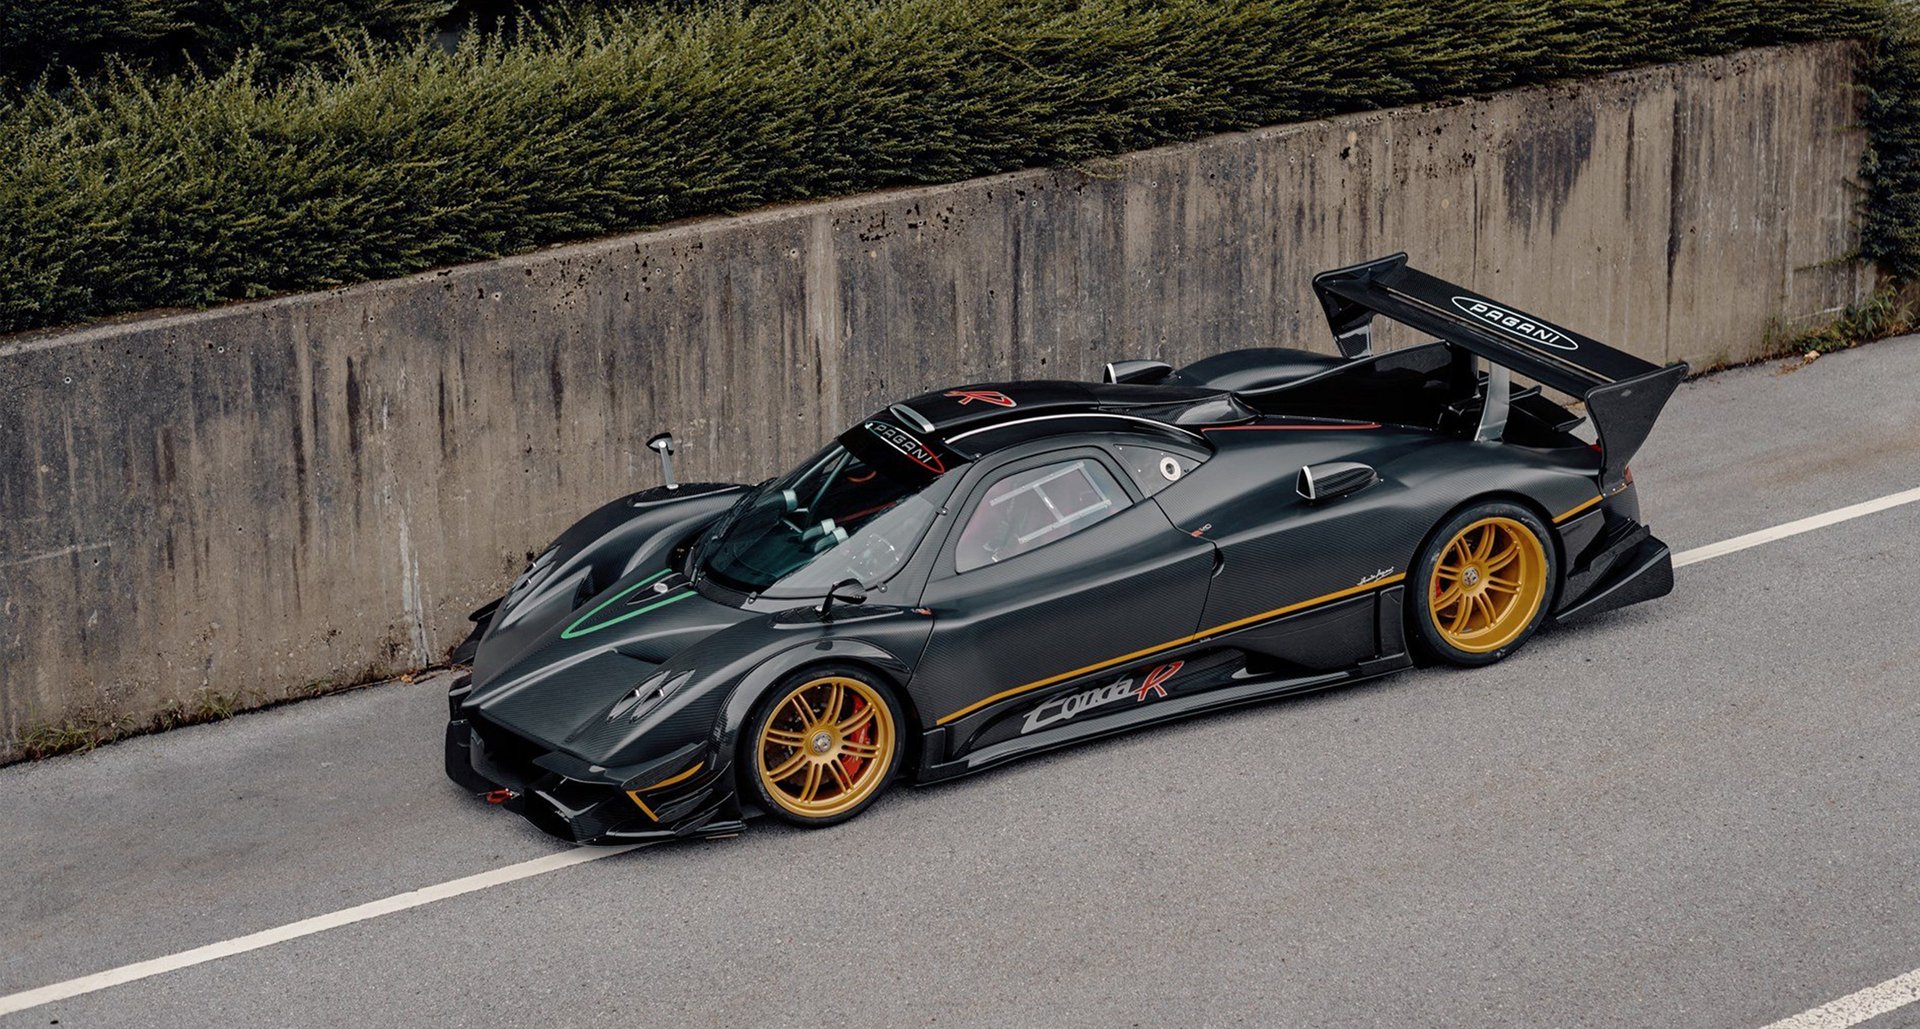 The Pagani Zonda R is a symbol of the ultimate pursuit of